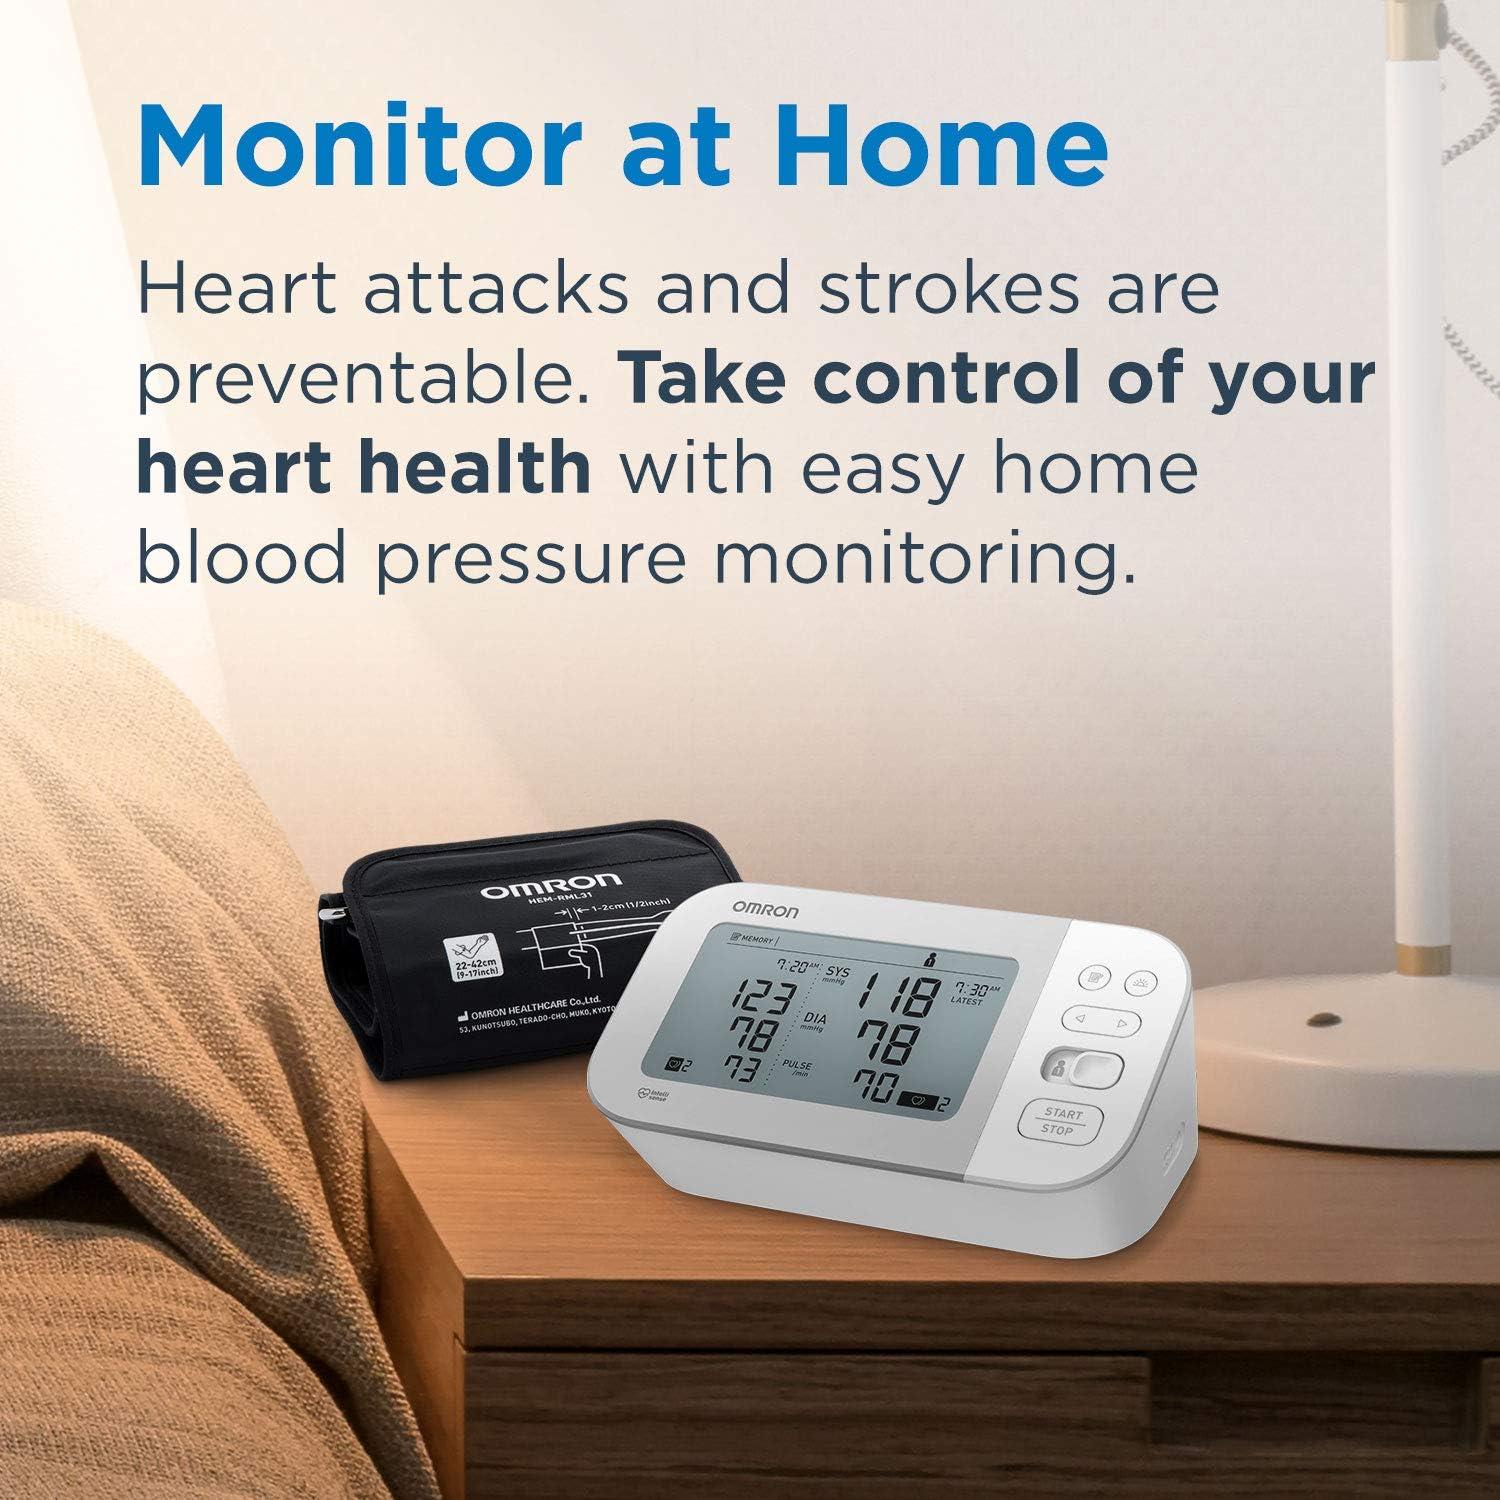  Omron 7 Series Wireless Upper Arm Blood Pressure Monitor;  2-User, 120-Reading Memory, BP Indicator LEDs, Bluetooth Works with   Alexa by Omron : Health & Household